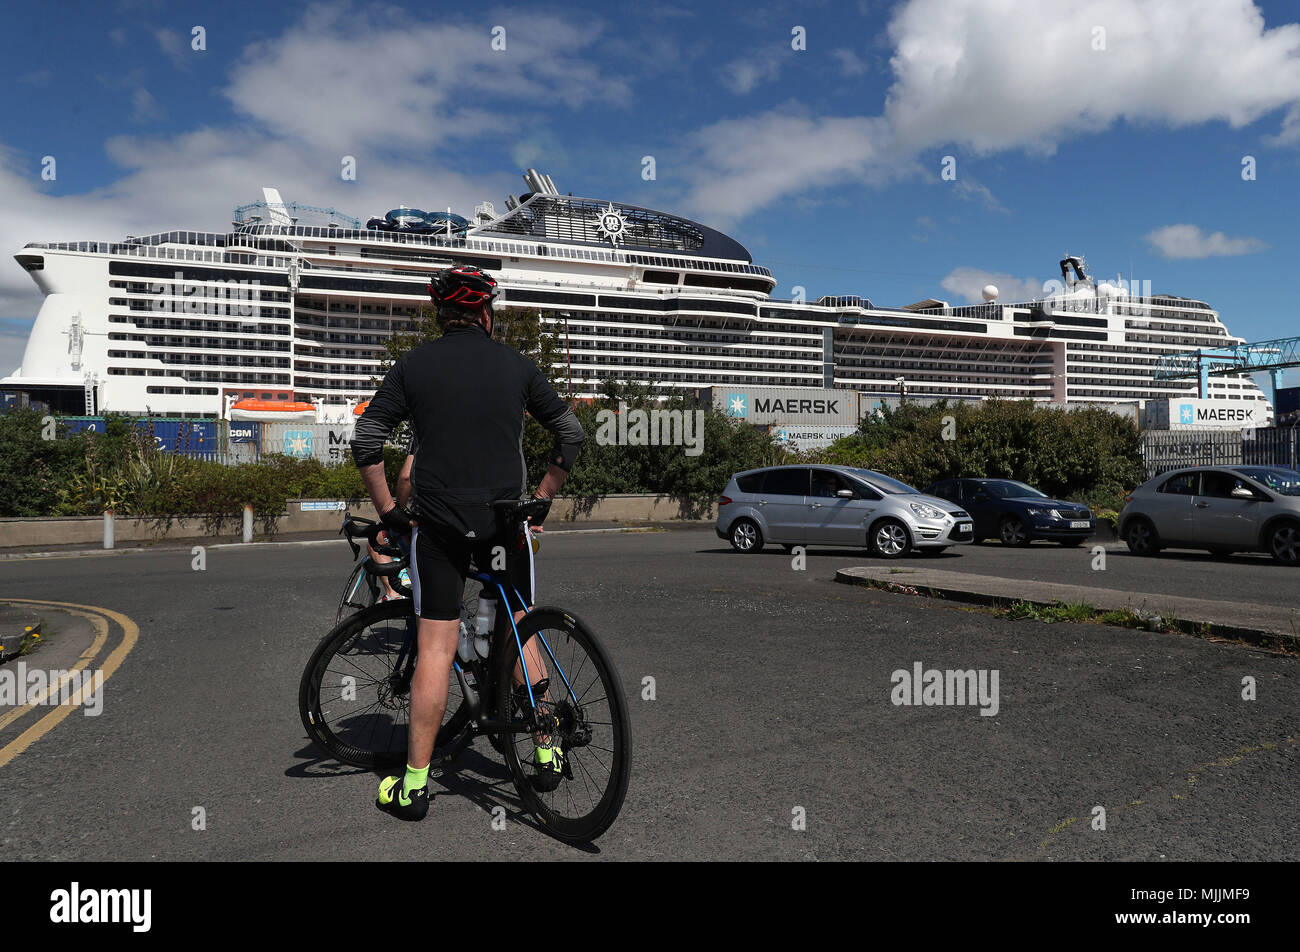 People stop to look at the MSC Meraviglia as it's docked in Dublin during it's maiden call to the city. At 315 metres long and 65 metres tall the ship can hold 5,700 guests making it the largest ever cruise ship (by passenger capacity) to dock in Ireland. Stock Photo